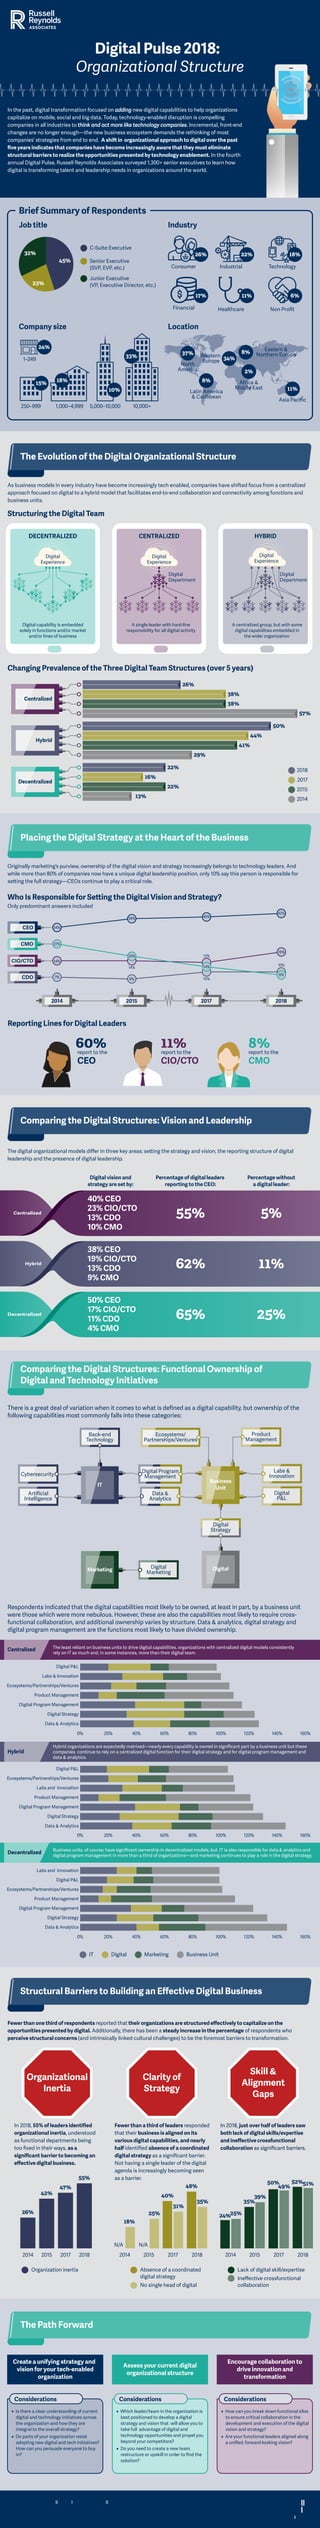 Structuring the Digital Team
As business models in every industry have become increasingly tech enabled, companies have shifted focus from a centralized
approach focused on digital to a hybrid model that facilitates end-to-end collaboration and connectivity among functions and
business units.
© Copyright 2018 Russell Reynolds Associates. All rights reserved.
Digital Pulse 2018:
Organizational Structure
In the past, digital transformation focused on adding new digital capabilities to help organizations
capitalize on mobile, social and big data. Today, technology-enabled disruption is compelling
companies in all industries to think and act more like technology companies. Incremental, front-end
changes are no longer enough—the new business ecosystem demands the rethinking of most
companies’ strategies from end to end.  A shift in organizational approach to digital over the past
ﬁve years indicates that companies have become increasingly aware that they must eliminate
structural barriers to realize the opportunities presented by technology enablement. In the fourth
annual Digital Pulse, Russell Reynolds Associates surveyed 1,300+ senior executives to learn how
digital is transforming talent and leadership needs in organizations around the world.
Brief Summary of Respondents
The Evolution of the Digital Organizational Structure
Comparing the Digital Structures: Vision and Leadership
Originally marketing’s purview, ownership of the digital vision and strategy increasingly belongs to technology leaders. And
while more than 80% of companies now have a unique digital leadership position, only 10% say this person is responsible for
setting the full strategy—CEOs continue to play a critical role.
The digital organizational models diﬀer in three key areas: setting the strategy and vision, the reporting structure of digital
leadership and the presence of digital leadership.
Fewer than one third of respondents reported that their organizations are structured eﬀectively to capitalize on the
opportunities presented by digital. Additionally, there has been a steady increase in the percentage of respondents who
perceive structural concerns (and intrinsically linked cultural challenges) to be the foremost barriers to transformation.
Placing the Digital Strategy at the Heart of the Business
DECENTRALIZED
Digital capability is embedded
solely in functions and/or market
and/or lines of business
CENTRALIZED
A single leader with hard-line
responsibility for all digital activity
HYBRID
Digital
Experience
A centralized group, but with some
digital capabilities embedded in
the wider organization
Digital
Experience
Digital
Department
Digital
Department
Changing Prevalence of the Three Digital Team Structures (over 5 years)
Who Is Responsible for Setting the Digital Vision and Strategy?
Only predominant answers included
Reporting Lines for Digital Leaders
Job title Industry
26%
38%
38%
57%
22%
16%
13%
22%
50%
44%
41%
29%
2018
2017
2015
2014
Centralized
Hybrid
Decentralized
Comparing the Digital Structures: Functional Ownership of
Digital and Technology Initiatives
CIO/CTO
2014 2015 2017 2018
Structural Barriers to Building an Eﬀective Digital Business
Digital vision and
strategy are set by:
Percentage without
a digital leader:
Percentage of digital leaders
reporting to the CEO:
The Path Forward
Digital
Experience
In 2018, 55% of leaders identiﬁed
organizational inertia, understood
as functional departments being
too ﬁxed in their ways, as a
signiﬁcant barrier to becoming an
eﬀective digital business.
Fewer than a third of leaders responded
that their business is aligned on its
various digital capabilities, and nearly
half identiﬁed absence of a coordinated
digital strategy as a signiﬁcant barrier.
Not having a single leader of the digital
agenda is increasingly becoming seen
as a barrier.
In 2018, just over half of leaders saw
both lack of digital skills/expertise
and ineﬀective crossfunctional
collaboration as signiﬁcant barriers.
Absence of a coordinated
digital strategy
Organization inertia
No single head of digital
Lack of digital skill/expertise
Ineﬀective crossfunctional
collaboration
26%
N/A N/A
42%
47%
55%
18%
25% 25%
35%
39%
50%
49% 51%52%
24%
31%
35%
40%
48%
2014 2015 2017 2018 2014 20142015 2017 2018 2015 2017 2018
CDO
CMO
CEO 34%
27%
14%
7%
39%
20%
14%
6%
40%
13%
14%
10%
42%
19%
9%
10%
8%report to the
CMO
11%report to the
CIO/CTO
60%report to the
CEO
40% CEO
23% CIO/CTO
13% CDO
10% CMO
55% 5%
38% CEO
19% CIO/CTO
13% CDO
9% CMO
62% 11%
50% CEO
17% CIO/CTO
11% CDO
4% CMO
65% 25%
Centralized
Hybrid
Decentralized
Organizational
Inertia
Clarity of
Strategy
Skill &
Alignment
Gaps
Create a unifying strategy and
vision for your tech-enabled
organization
Assess your current digital
organizational structure
Encourage collaboration to
drive innovation and
transformation
Considerations
Is there a clear understanding of current
digital and technology initiatives across
the organization and how they are
integral to the overall strategy?
Do parts of your organization resist
adopting new digital and tech initiatives?
How can you persuade everyone to buy
in?
Considerations Considerations
How can you break down functional silos
to ensure critical collaboration in the
development and execution of the digital
vision and strategy?
Are your functional leaders aligned along
a uniﬁed, forward-looking vision?
Which leader/team in the organization is
best positioned to develop a digital
strategy and vision that will allow you to
take full advantage of digital and
technology opportunities and propel you
beyond your competitors?
Do you need to create a new team,
restructure or upskill in order to ﬁnd the
solution?
IT Digital Marketing Business Unit
Digital
Marketing
Artiﬁcial
Intelligence
Cybersecurity
Back-end
Technology
Digital
P&L
Labs &
Innovation
Product
Management
Marketing Digital
Digital
Strategy
Data &
Analytics
Digital Program
Management
Ecosystems/
Partnerships/Ventures
IT
Business
Unit
There is a great deal of variation when it comes to what is deﬁned as a digital capability, but ownership of the
following capabilities most commonly falls into these categories:
Respondents indicated that the digital capabilities most likely to be owned, at least in part, by a business unit
were those which were more nebulous. However, these are also the capabilities most likely to require cross-
functional collaboration, and additional ownership varies by structure. Data & analytics, digital strategy and
digital program management are the functions most likely to have divided ownership.
45%
23%
32%
C-Suite Executive
Senior Executive
(SVP, EVP, etc.)
Junior Executive
(VP, Executive Director, etc.)
Company size Location
Consumer
1–249
250–999 1,000–4,999 5,000–10,000 10,000+
Industrial Technology
Financial Healthcare Non Proﬁt
26%
24%
22% 18%
17% 11% 6%
15%
10%
33%
18%
11%
Asia Paciﬁc
8%
Latin America
& Caribbean
2%
8%
34%
Africa &
Middle East
Eastern &
Northern EuropeWestern
Europe
37%
North
America
0% 20% 40% 60% 80% 100% 120% 140% 160%
0% 20% 40% 60% 80% 100% 120% 140% 160%
0% 20% 40% 60% 80% 100% 120% 140% 160%
The least reliant on business units to drive digital capabilities, organizations with centralized digital models consistently
rely on IT as much and, in some instances, more than their digital team.
Hybrid organizations are expectedly matrixed—nearly every capability is owned in signiﬁcant part by a business unit but these
companies continue to rely on a centralized digital function for their digital strategy and for digital program management and
data & analytics.
Business units, of course, have signiﬁcant ownership in decentralized models, but IT is also responsible for data & analytics and
digital program management in more than a third of organizations—and marketing continues to play a role in the digital strategy.
Digital Strategy
Labs & Innovation
Ecosystems/Partnerships/Ventures
Product Management
Digital Program Management
Data & Analytics
Digital P&L
Digital Strategy
Labs and Innovation
Ecosystems/Partnerships/Ventures
Product Management
Digital Program Management
Data & Analytics
Digital P&L
Digital Strategy
Labs and Innovation
Ecosystems/Partnerships/Ventures
Product Management
Digital Program Management
Data & Analytics
Digital P&L
Hybrid
Decentralized
Centralized
 